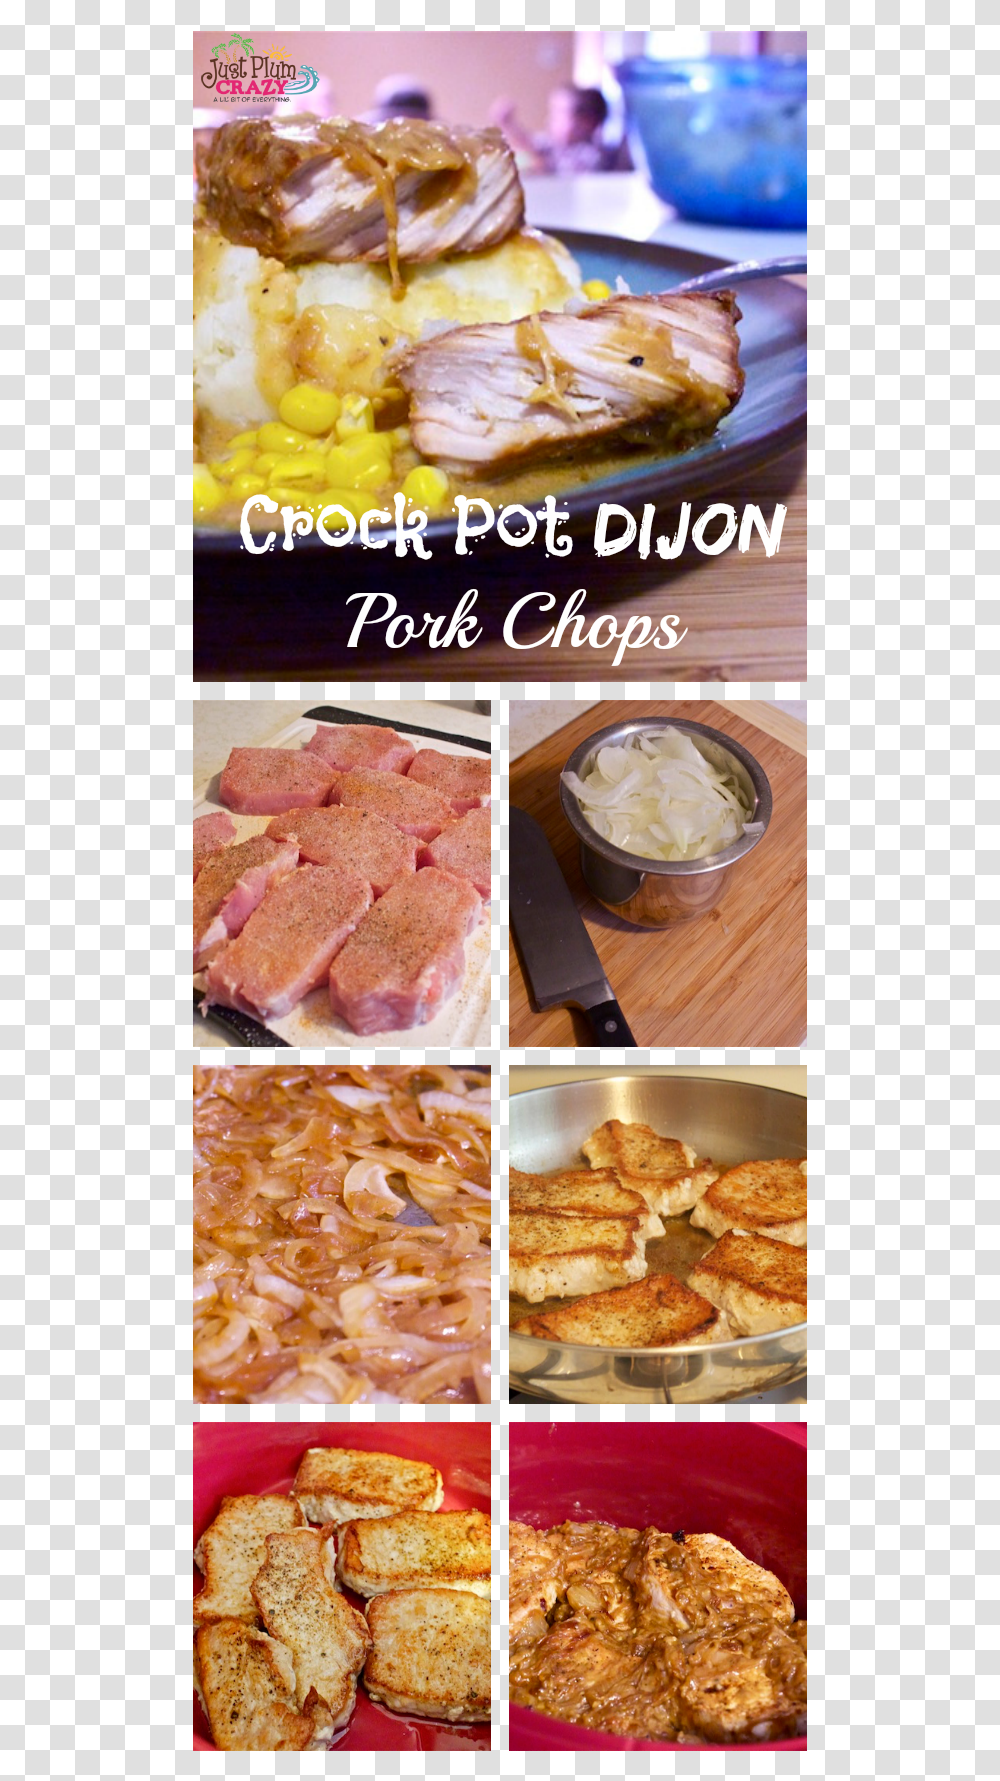 Crock Pot Pork Chops With Caramelized Onion Amp Dijon Banana Bread, Sweets, Food, Pizza, Plant Transparent Png